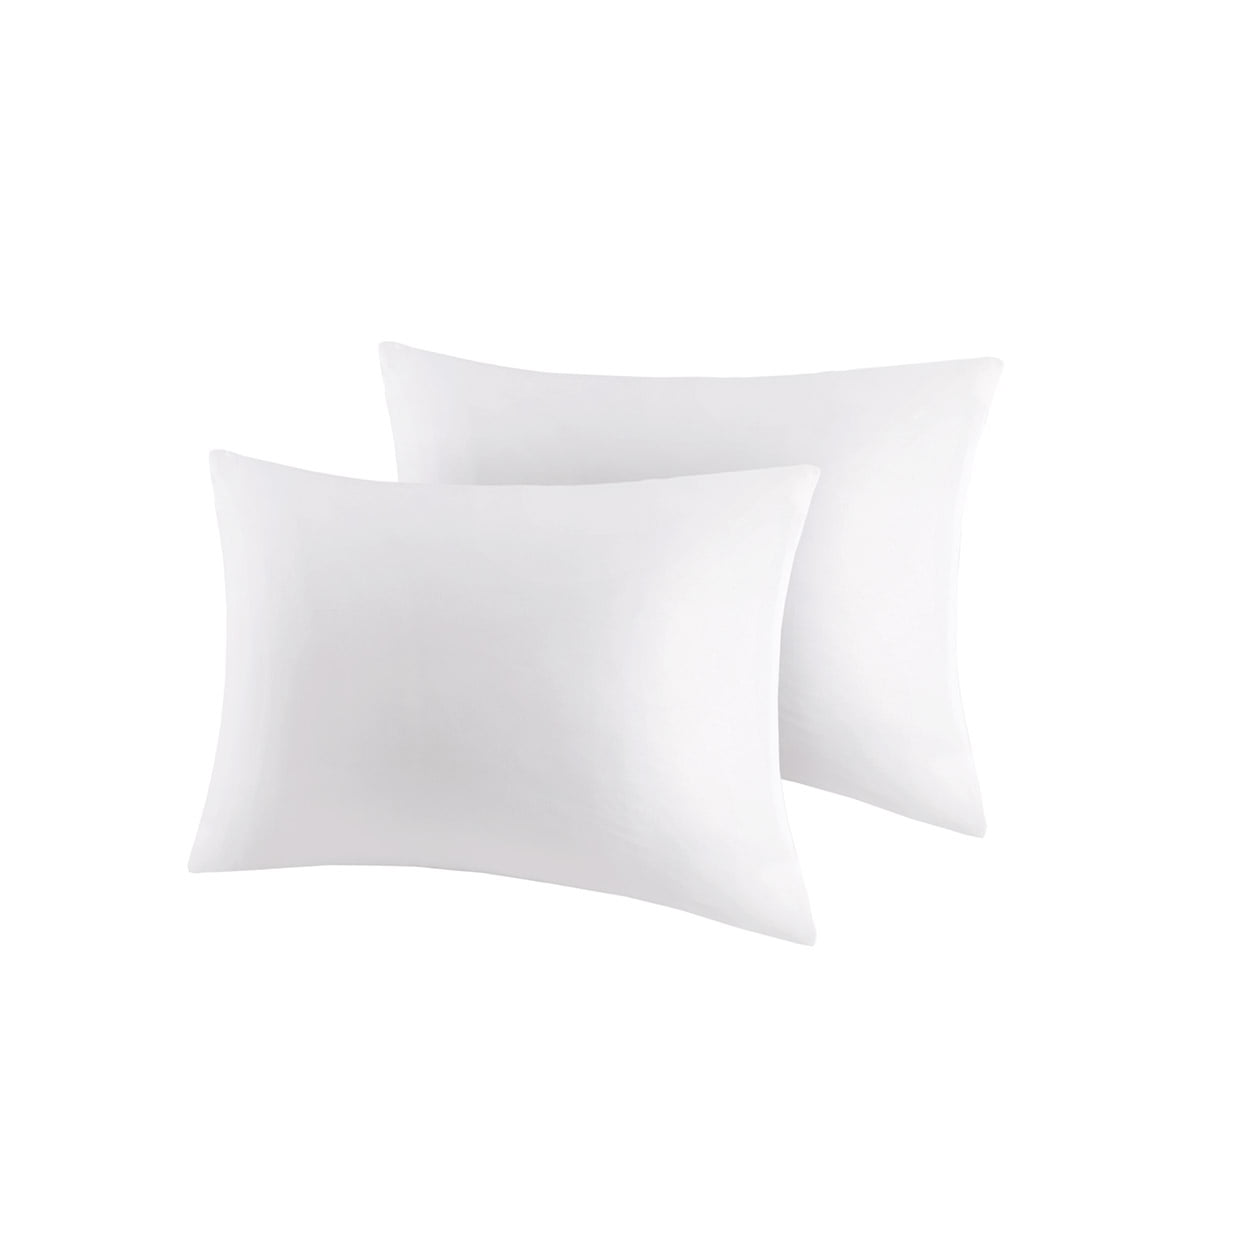 Waterproof Pillow Protector 3M Stain Release And TPU Laminated 